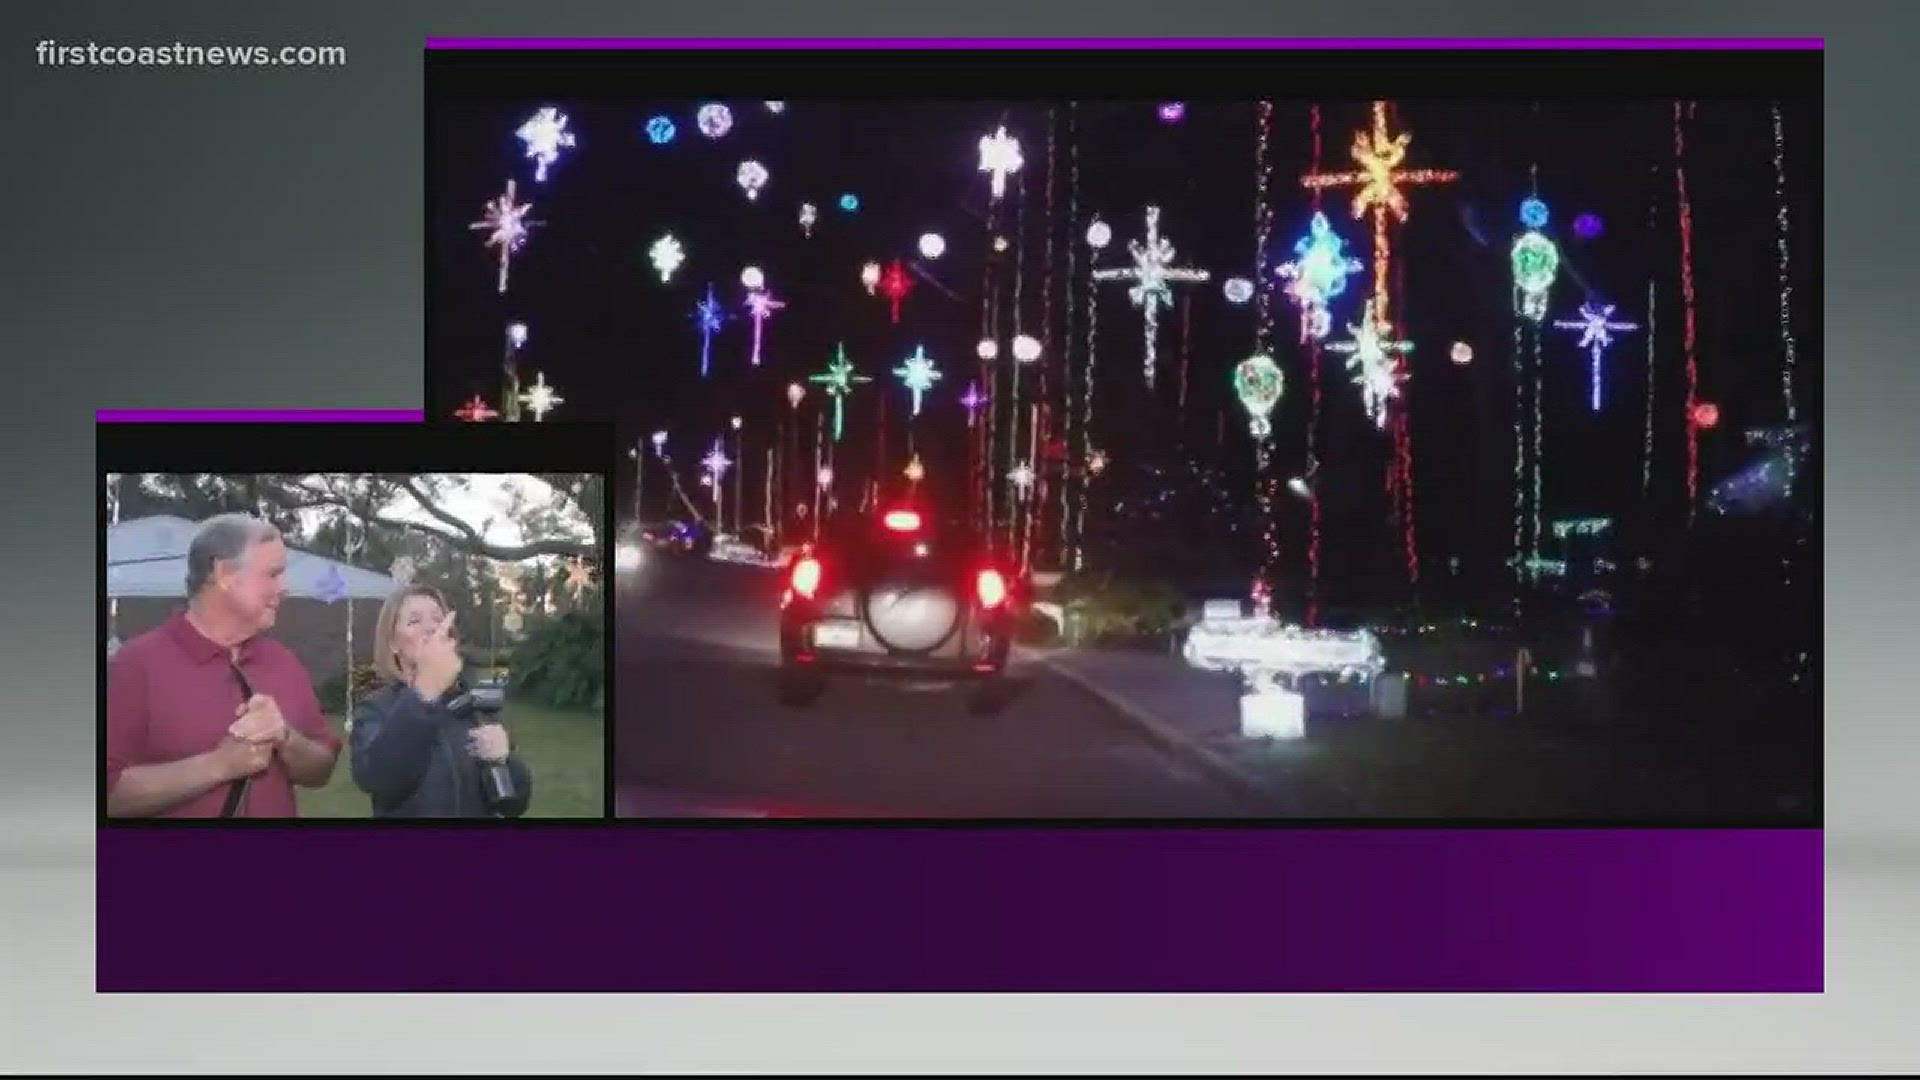 A popular subdivision for Christmas lights has already got their decorations up and running this year.